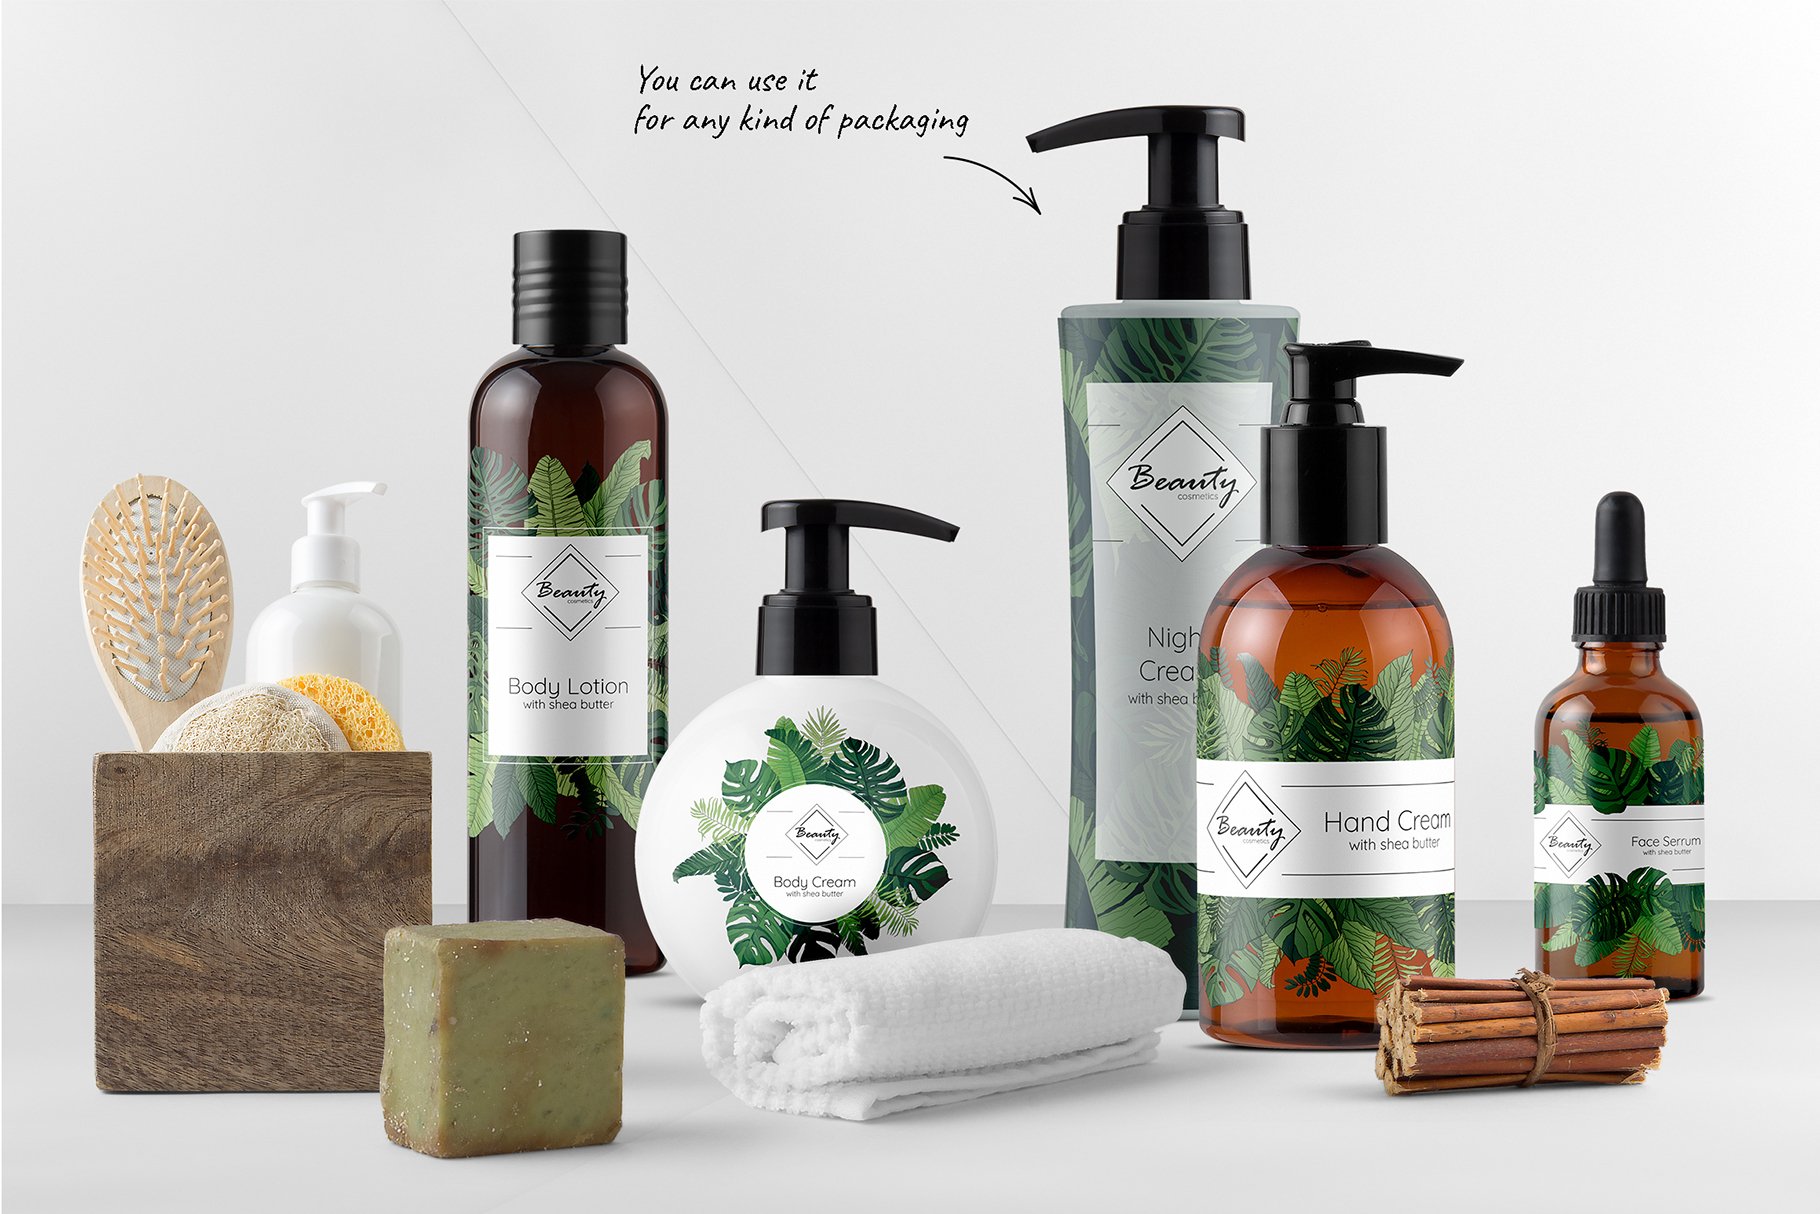 Variety of hand and body care products.